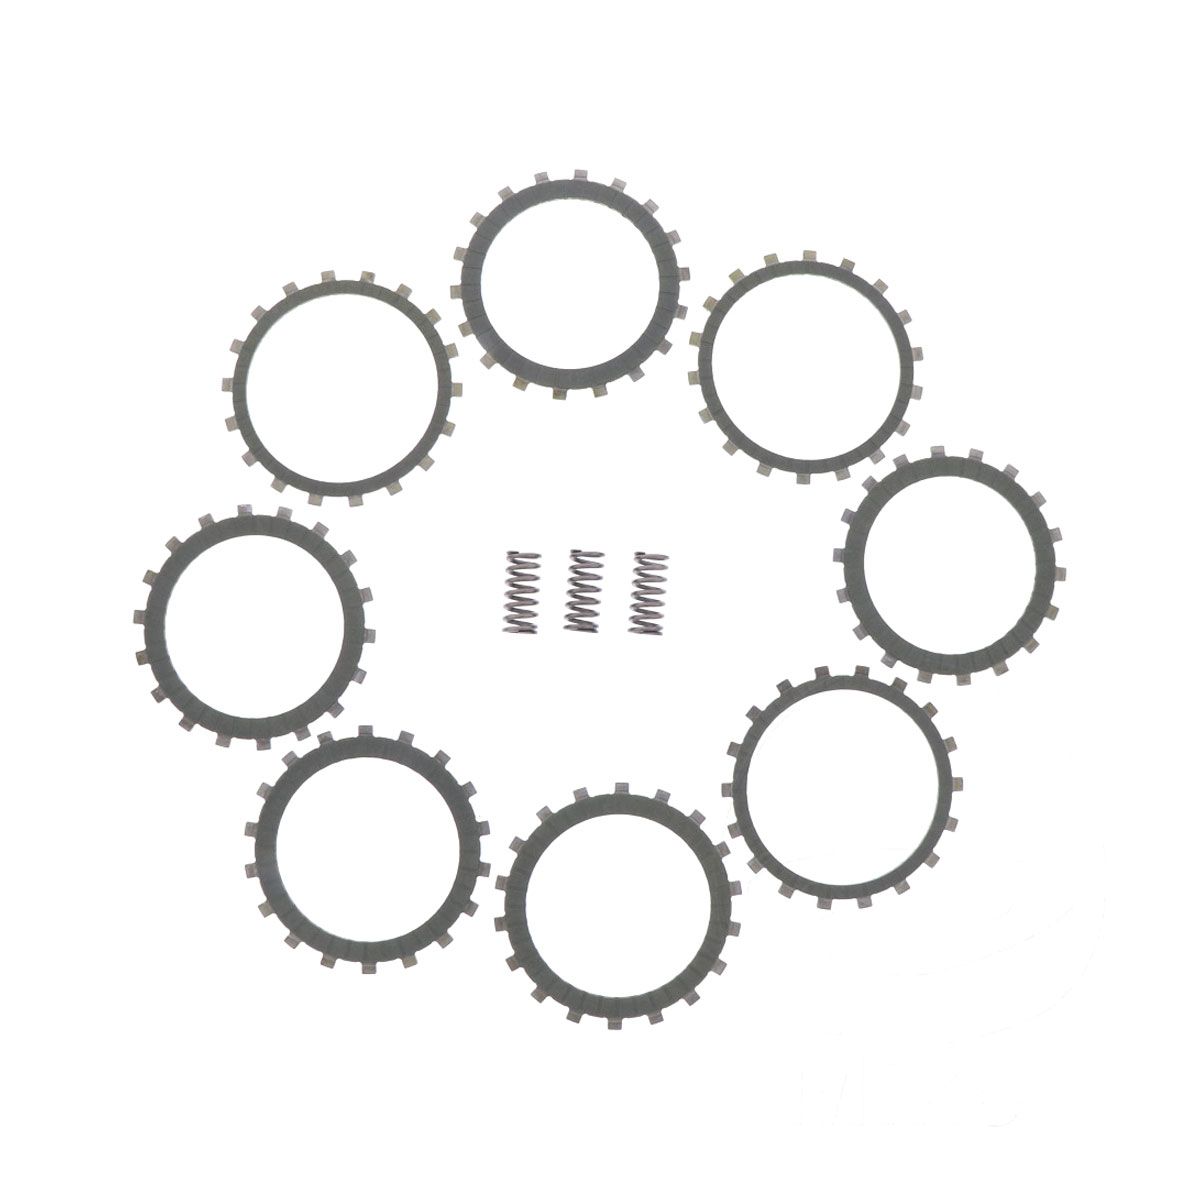 Motorcycle Clutch Kits & Components - Wide selection on BRIXIAMOTO.com